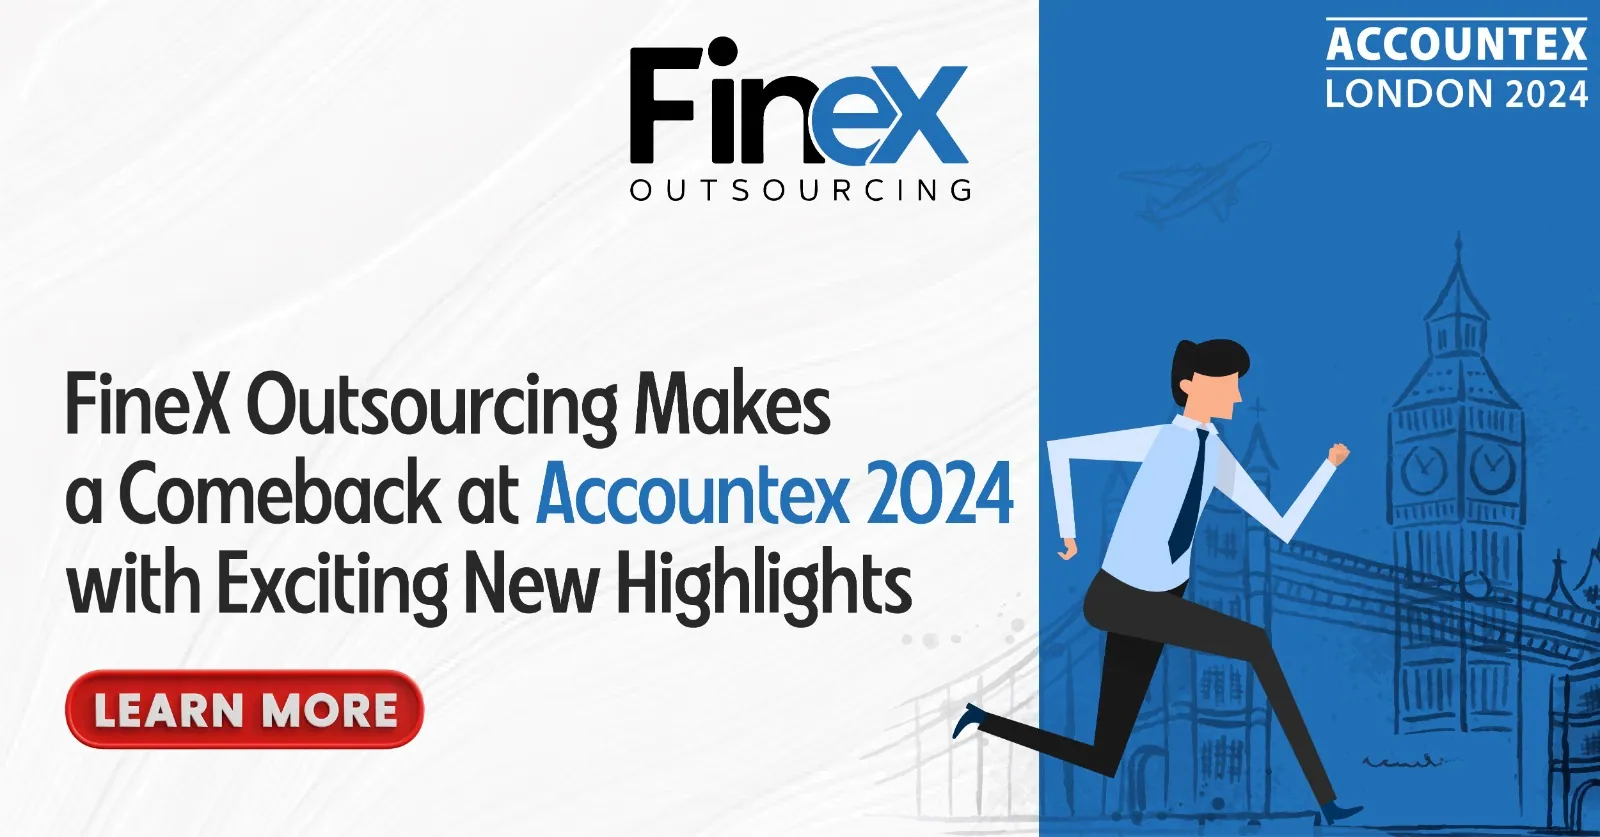 FineX Outsourcing Makes a Comeback at Accountex 2024 with Exciting New Highlights